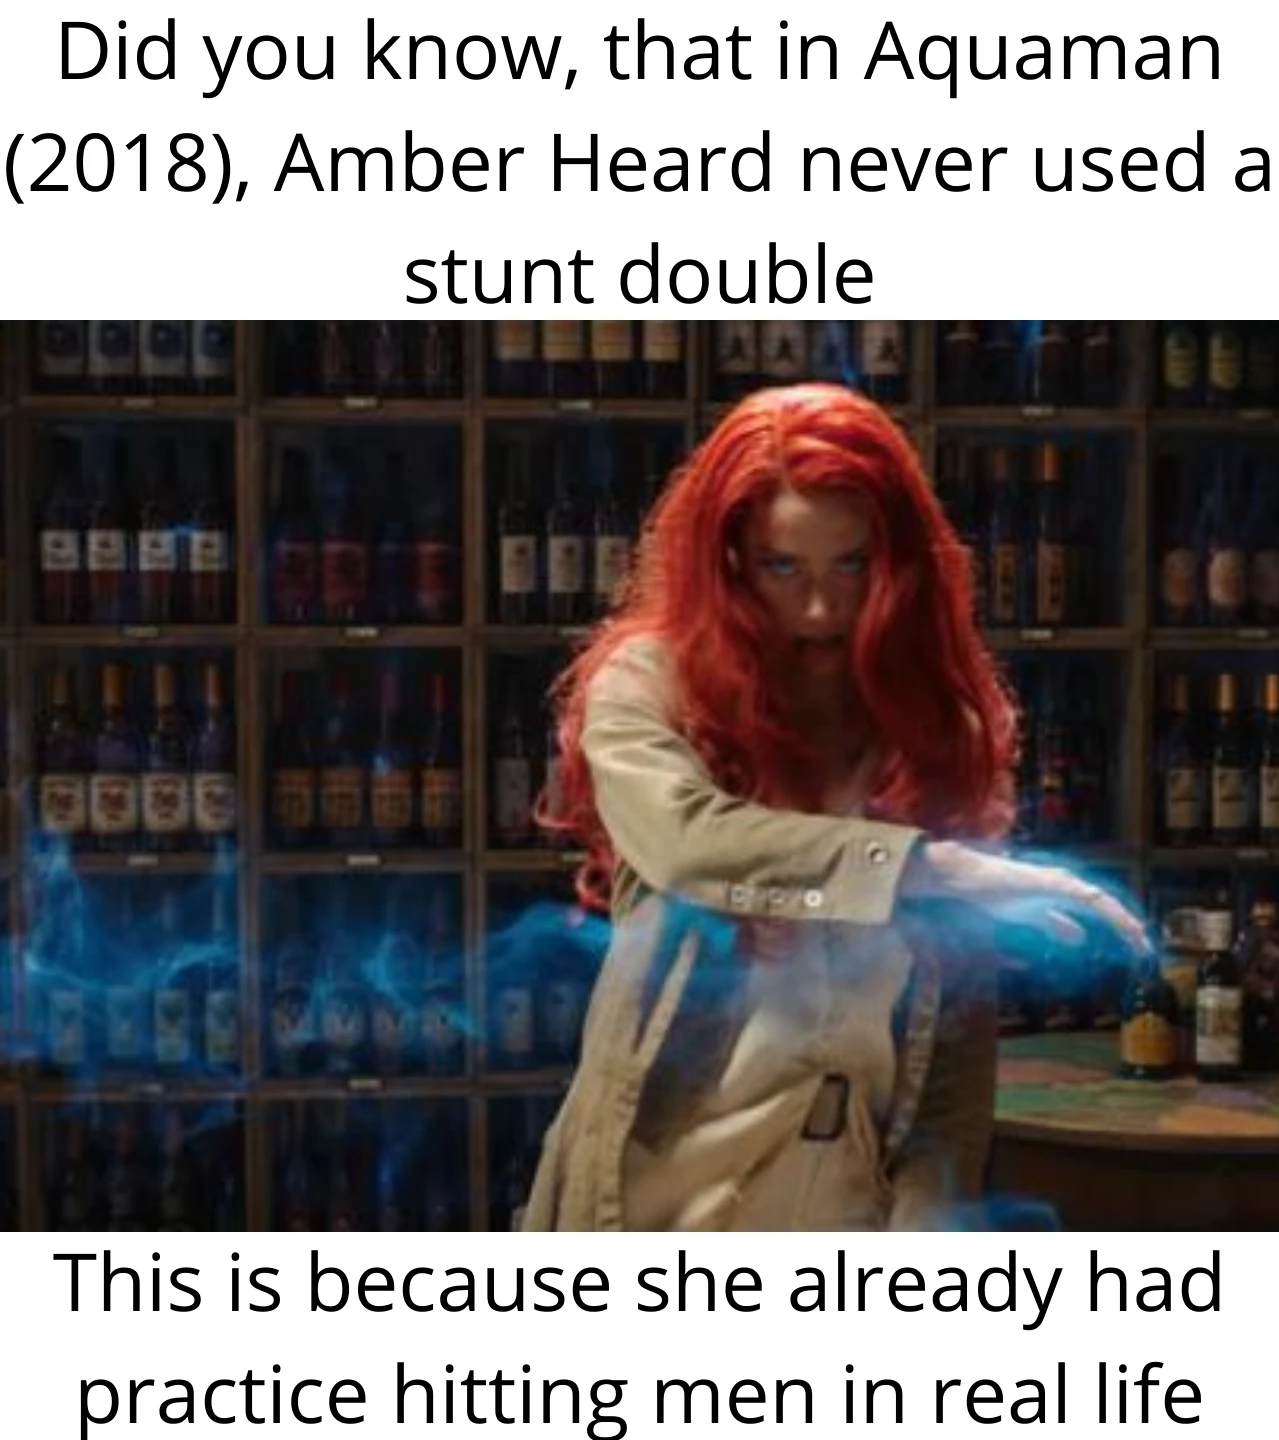 Though underwater, Amber was still roasted